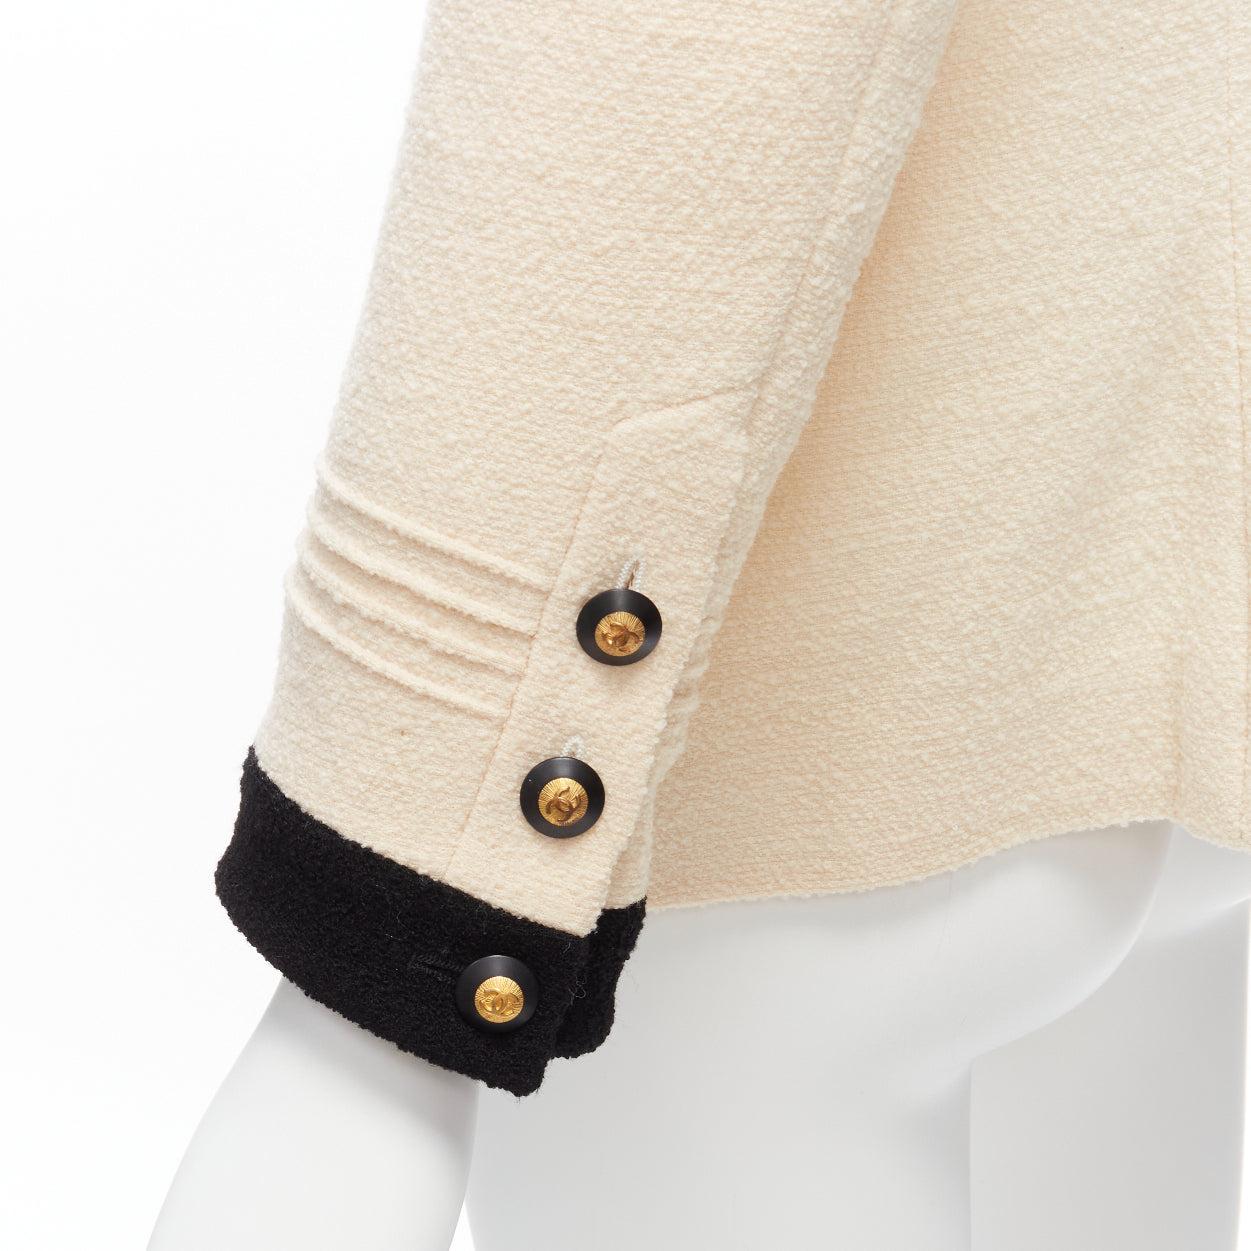 CHANEL Karl Lagerfeld 93A Vintage cream black trim boucle tweed jacket FR44 XXL
Reference: TGAS/D00545
Brand: Chanel
Designer: Karl Lagerfeld
Collection: 93A
Material: Wool, Blend
Color: Black, Cream
Pattern: Solid
Closure: Button
Lining: Beige